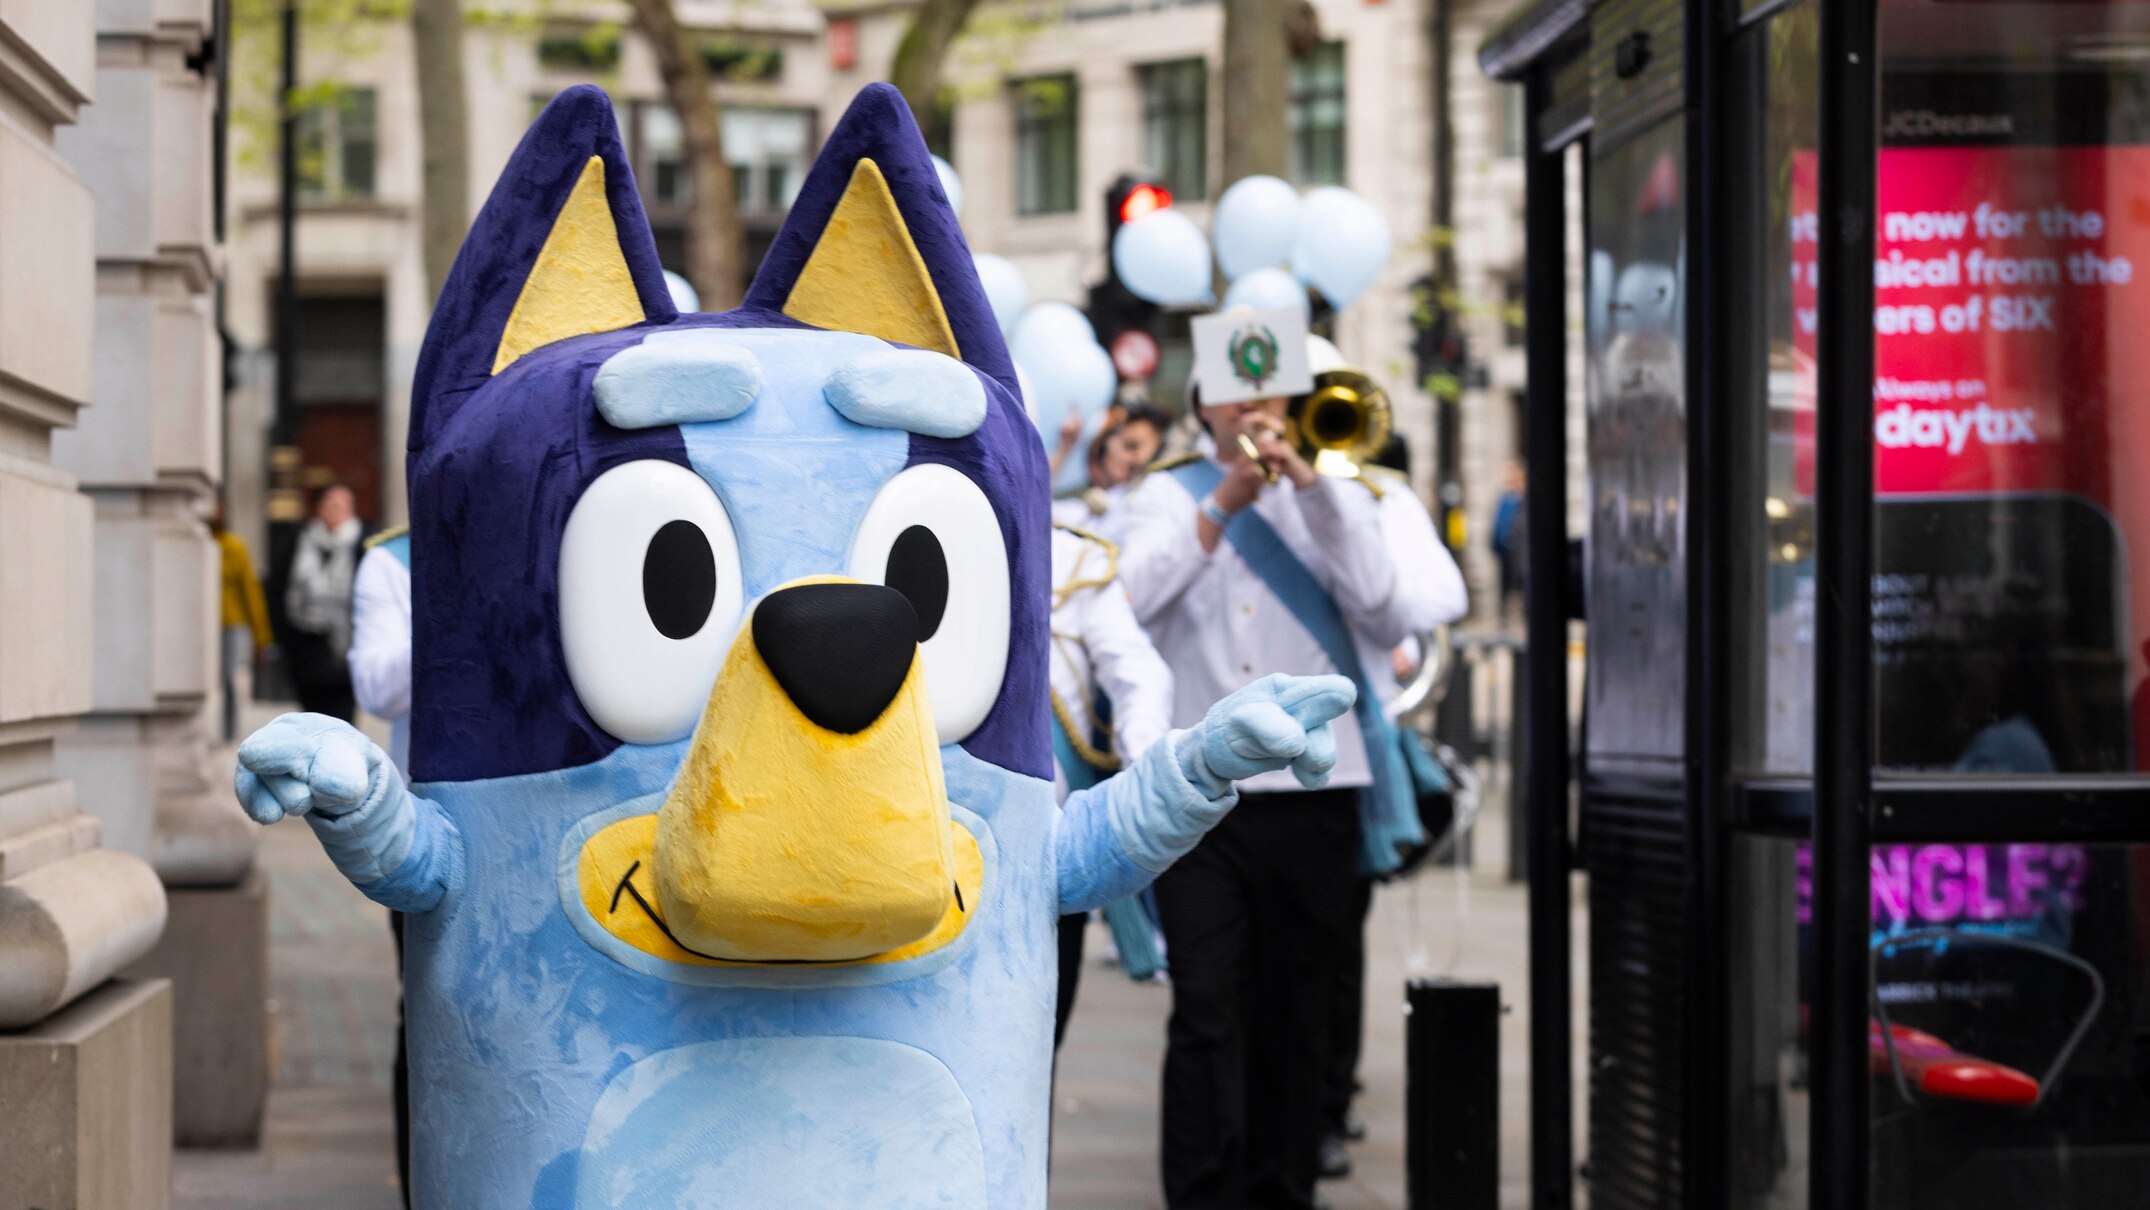 it's 'bluey house' now, as london awards show for its cultural success